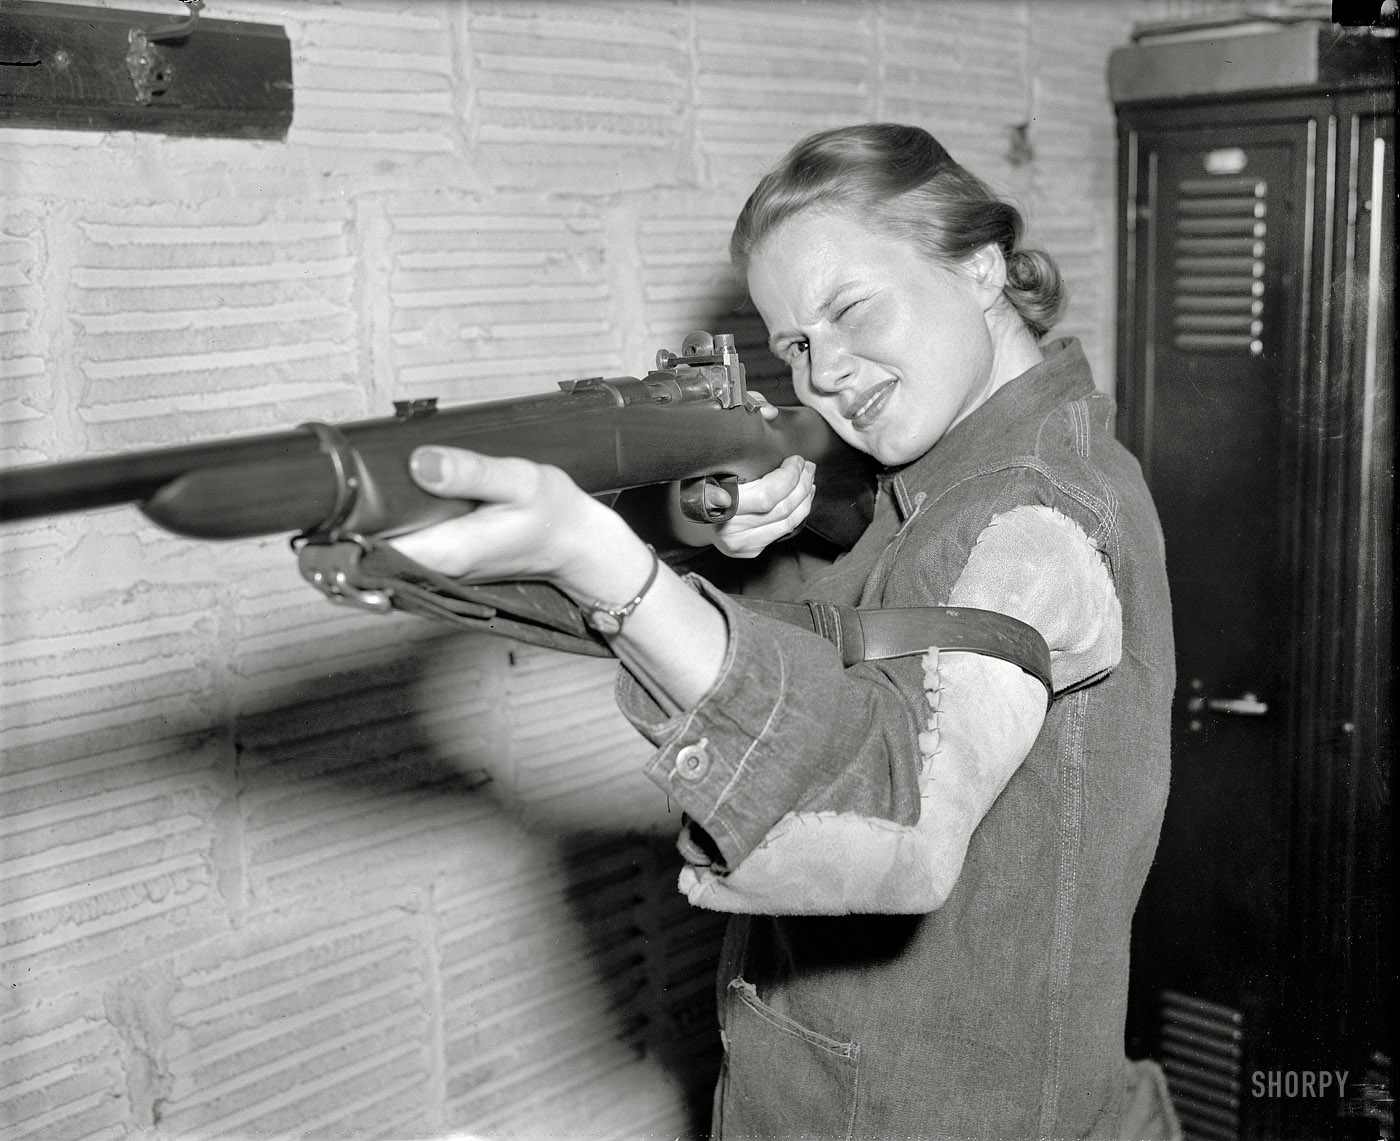 April 6, 1939. "Co-ed queen of rifle shooters. Jean Yocum, George Washington University co-ed, has won the Women's Individual Intercollegiate Rifle Championship, according to the National Rifle Association. Her score of 496 out of a possible 500 gave the individual title to a G.W. girl for the first time since 1929. Although this is only Miss Yocum's second year of shooting, she has maintained an average of 99 out of a possible 100 in all matches." View full size.